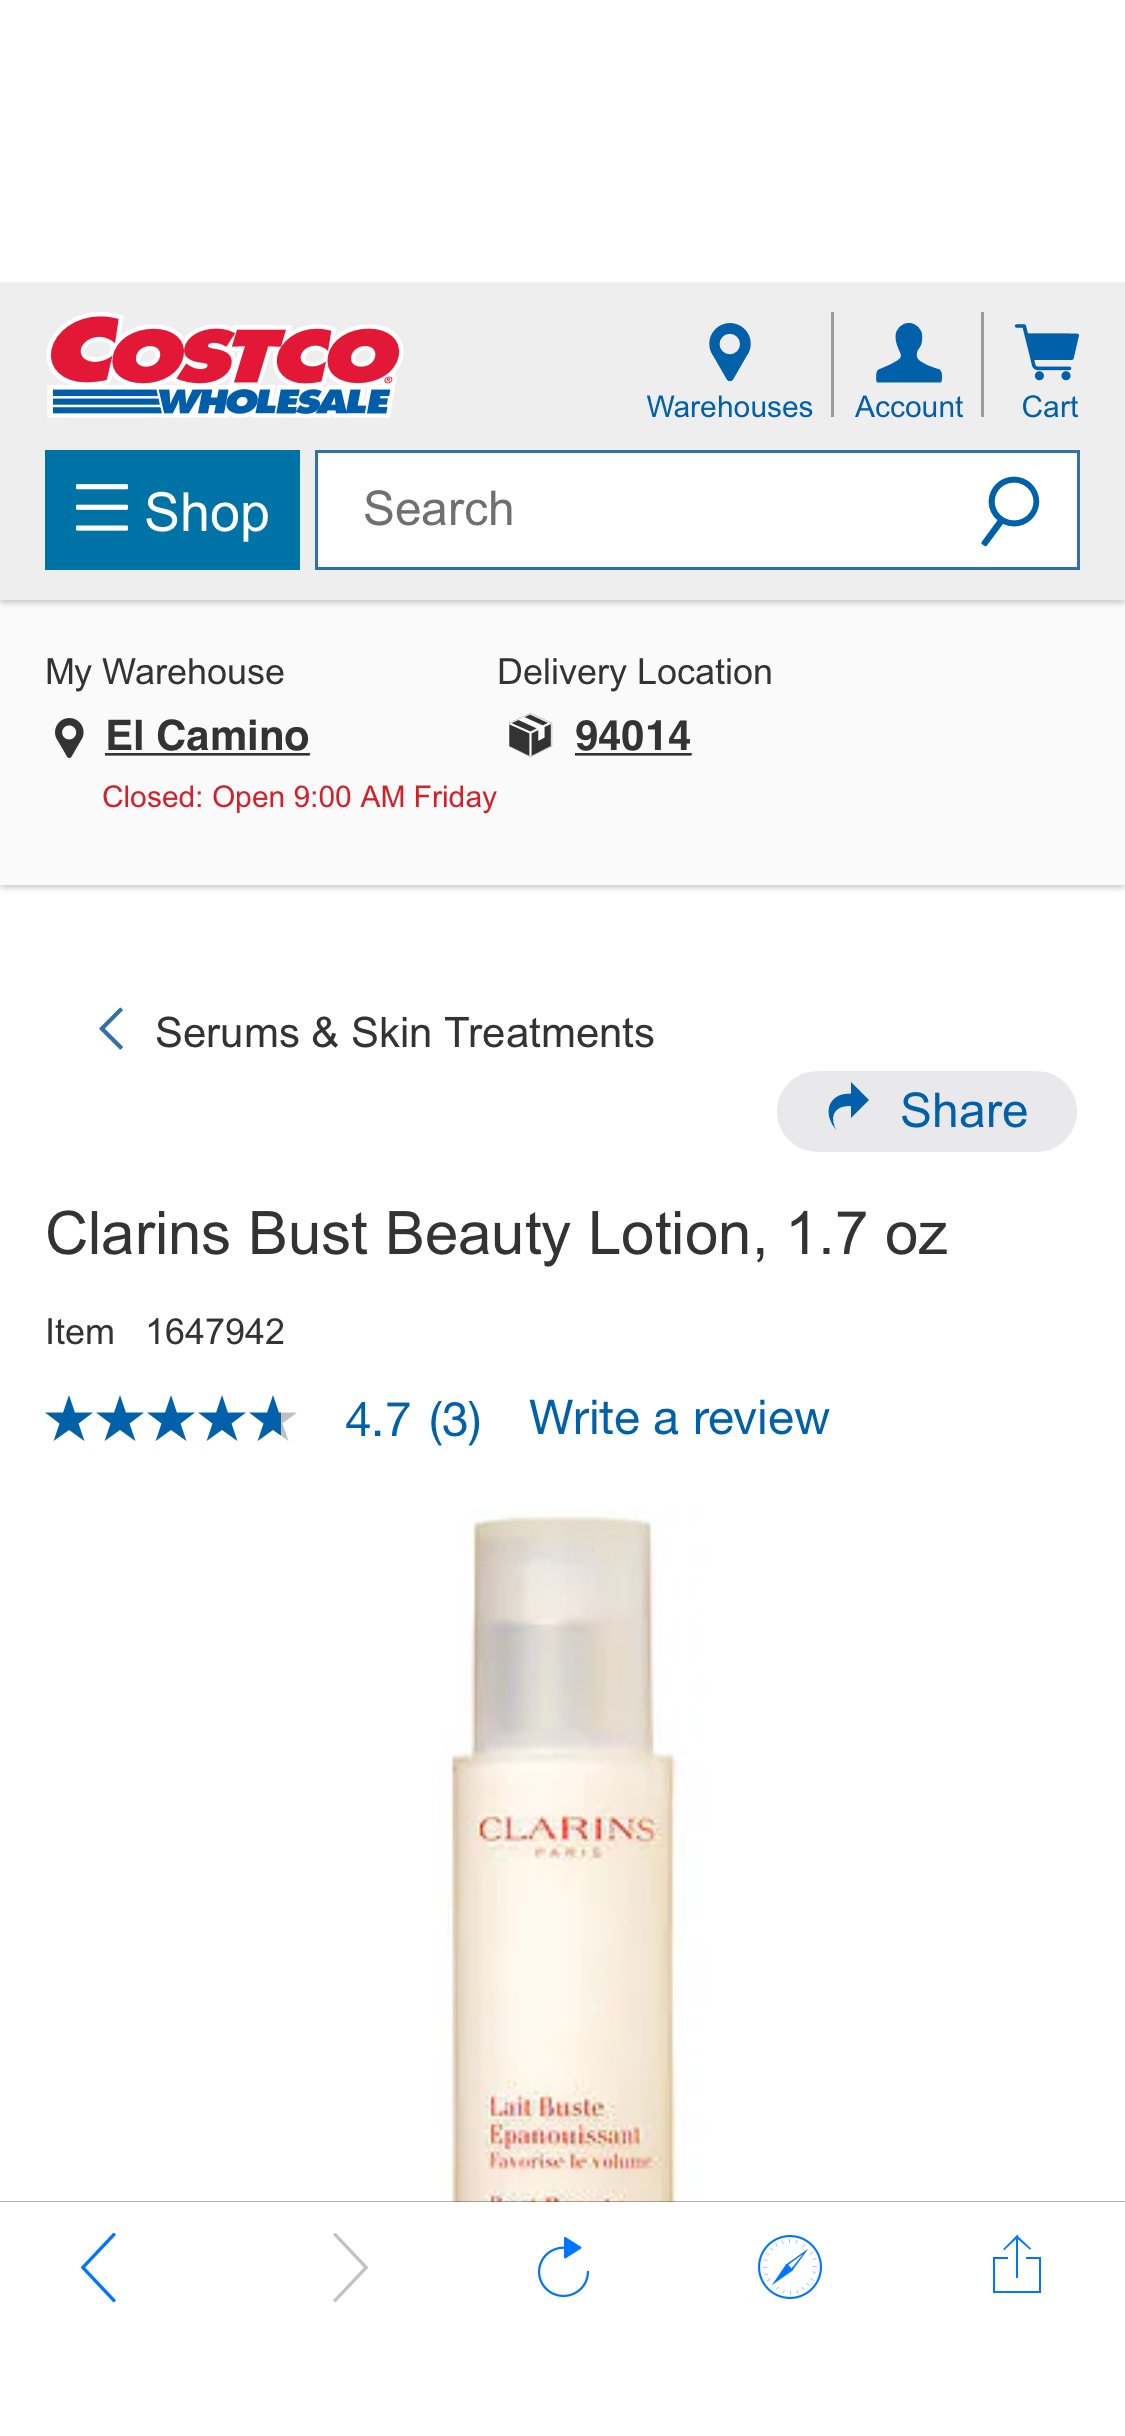 Clarins Bust Beauty Lotion, 1.7 oz | Costco